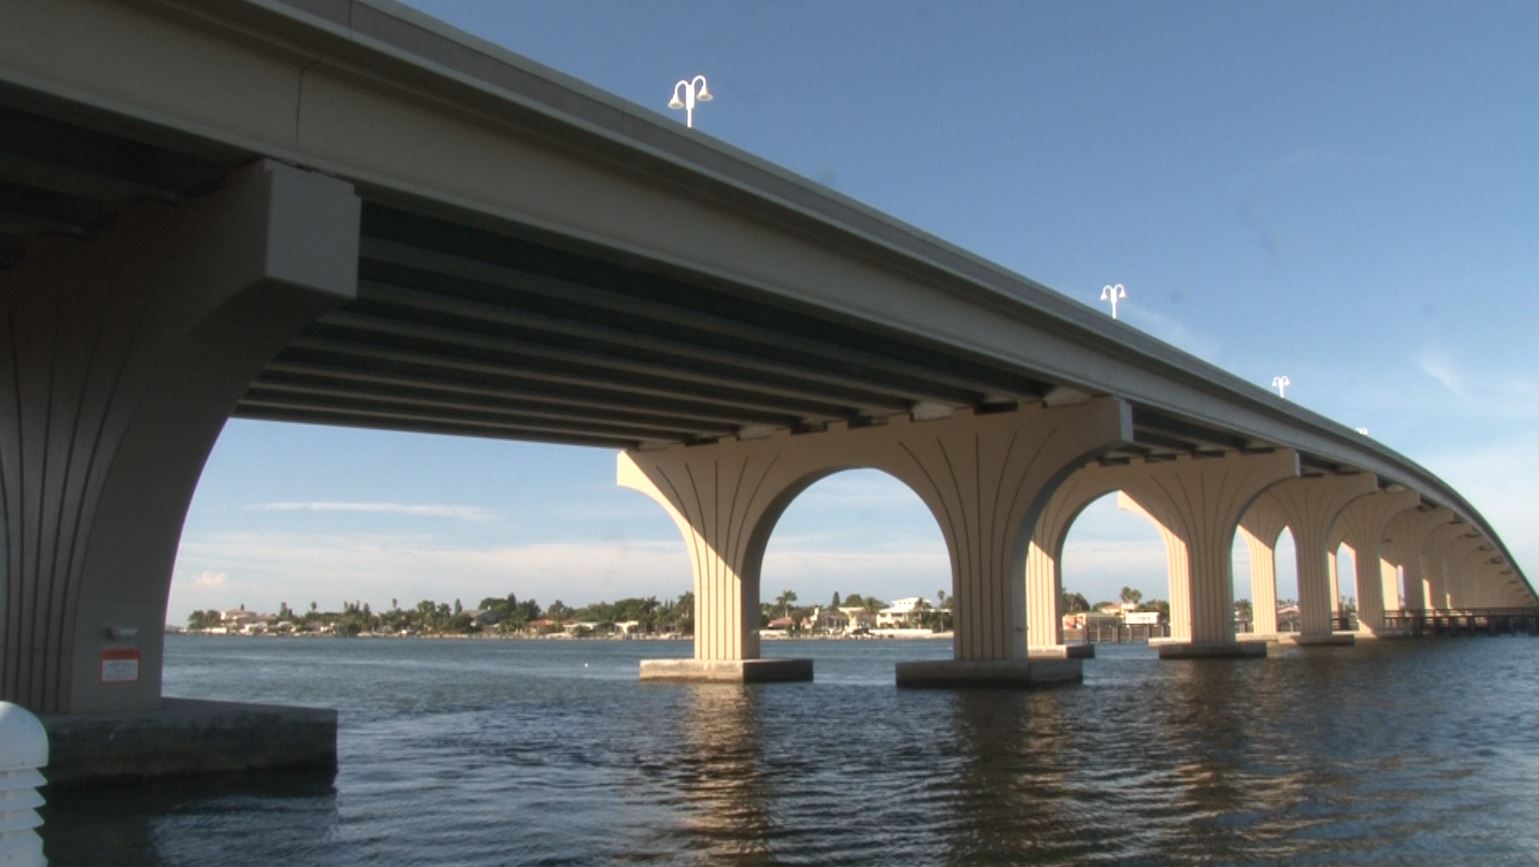 New Pinellas Bayway grand opening Friday